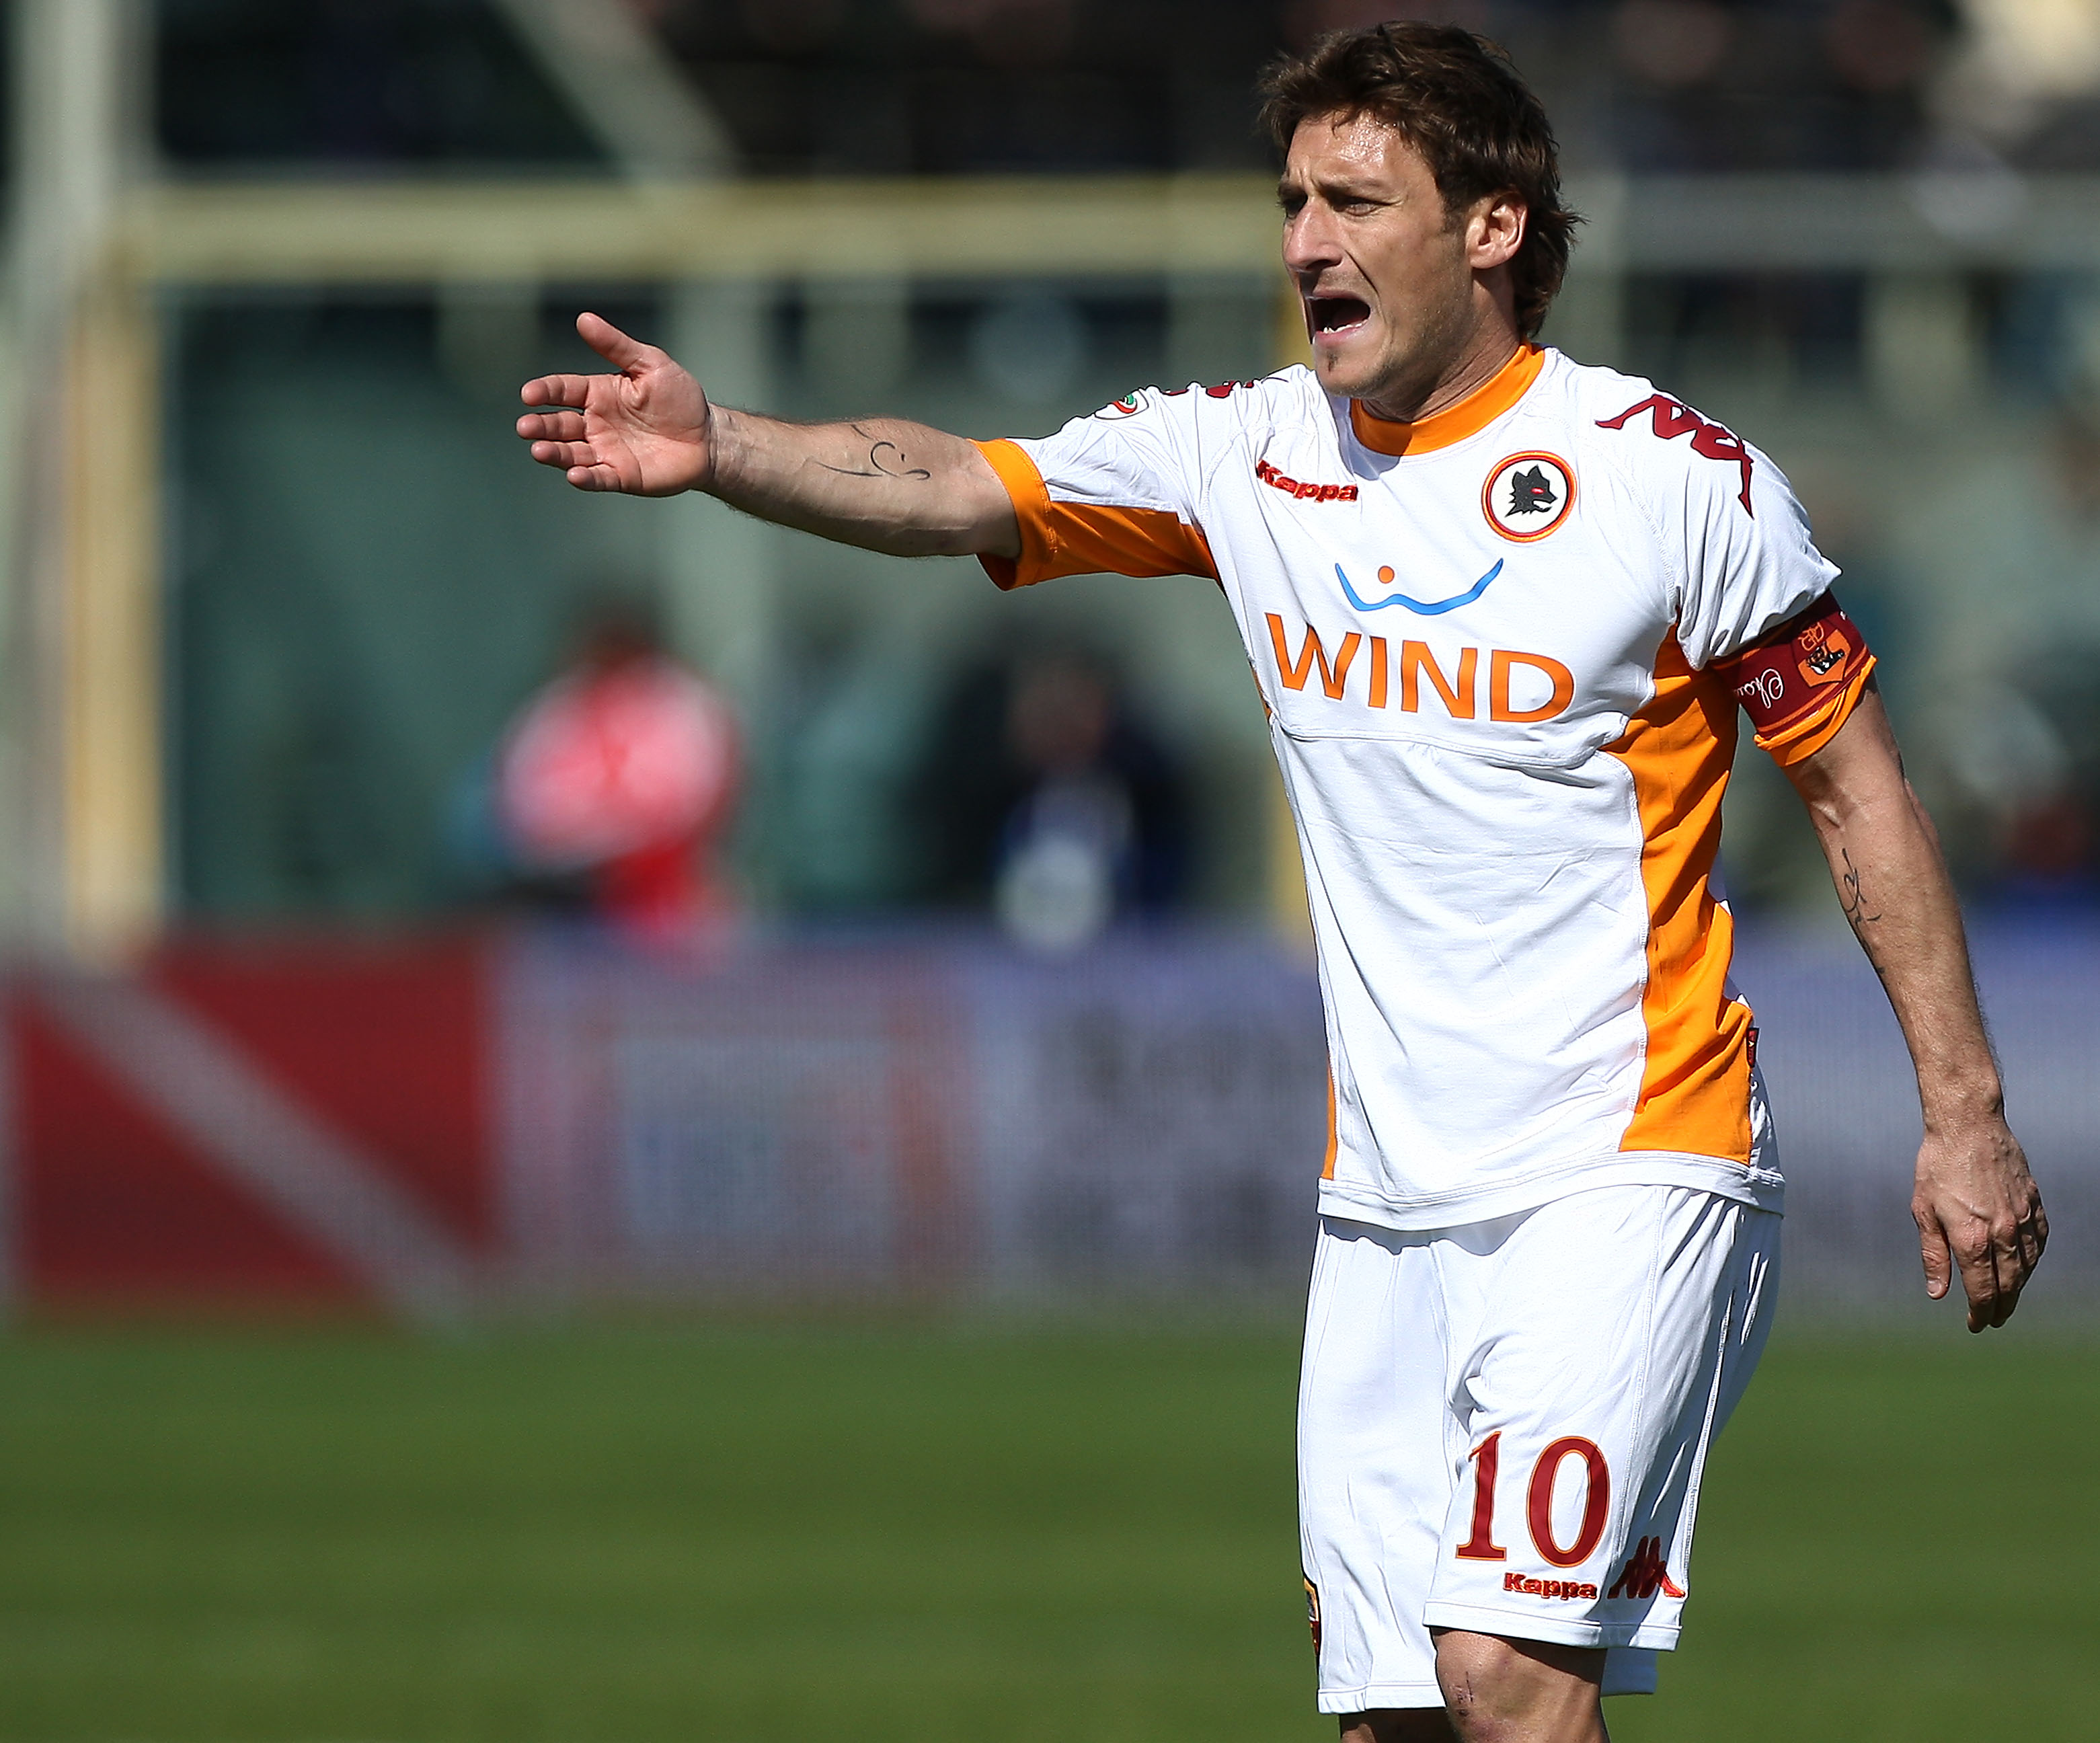 FLORENCE, ITALY - MARCH 20:  Francesco Totti of AS Roma gestures during the Serie A match between ACF Fiorentina and AS Roma at Stadio Artemio Franchi on March 20, 2011 in Florence, Italy.  (Photo by Paolo Bruno/Getty Images)